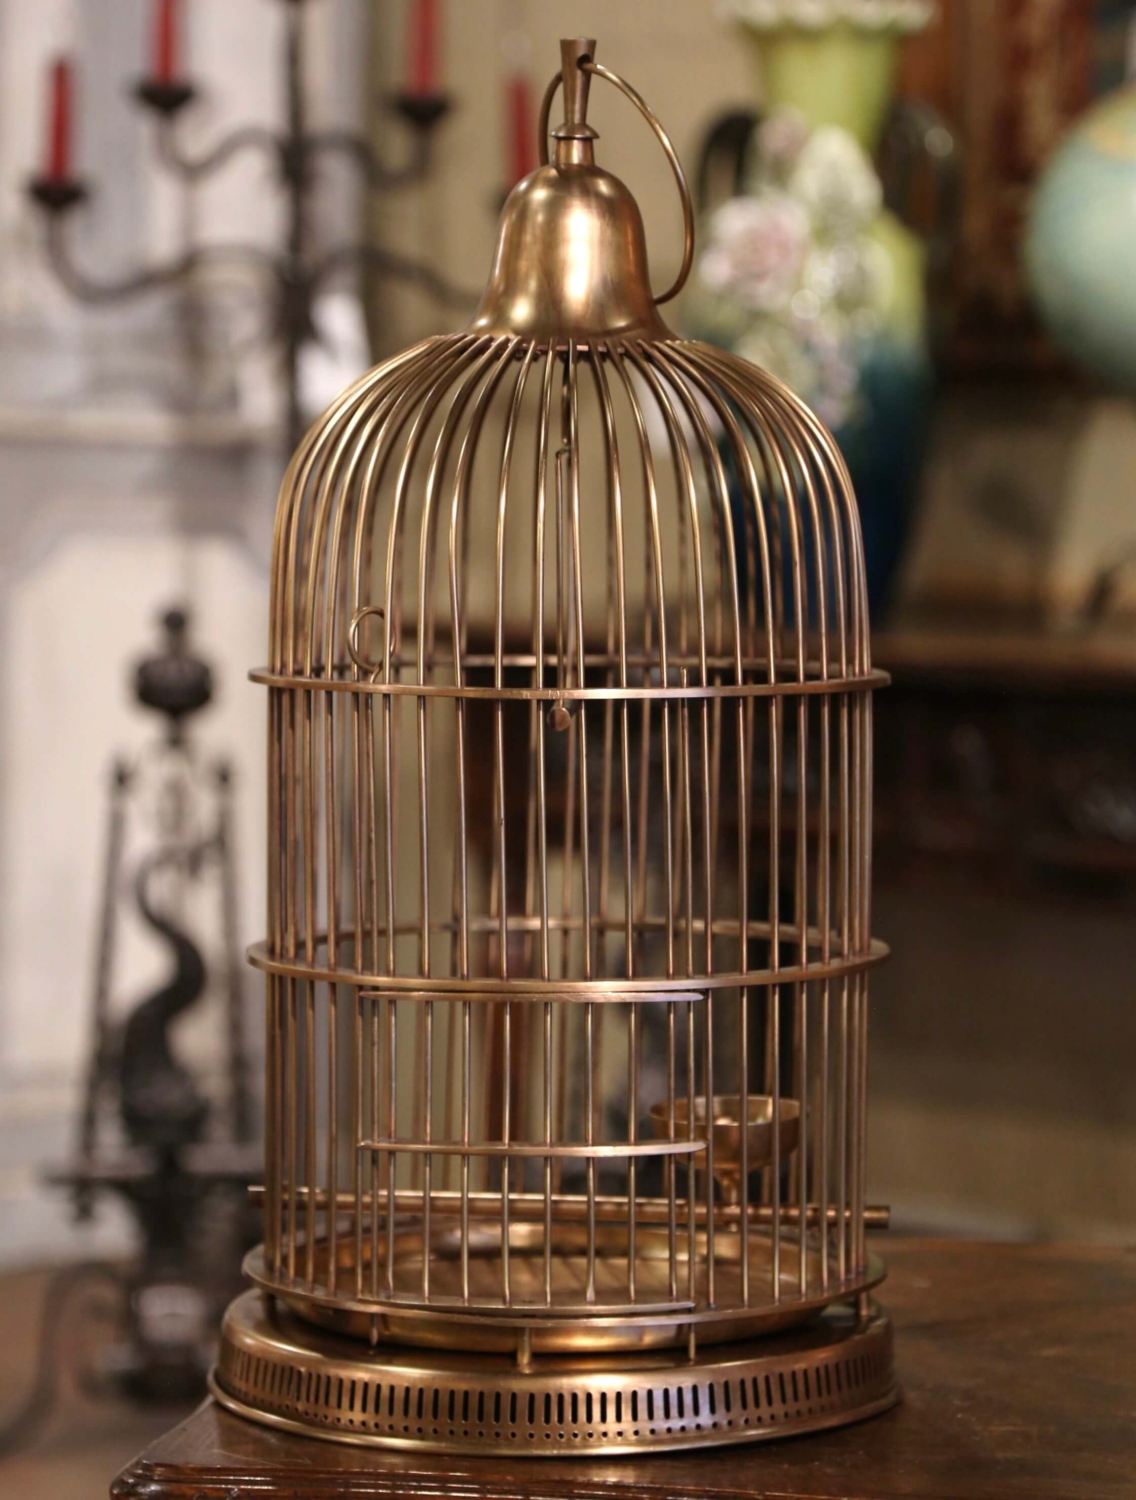 1970s Vintage Chinoiserie Brass Birdcage With Porcelain Feeding